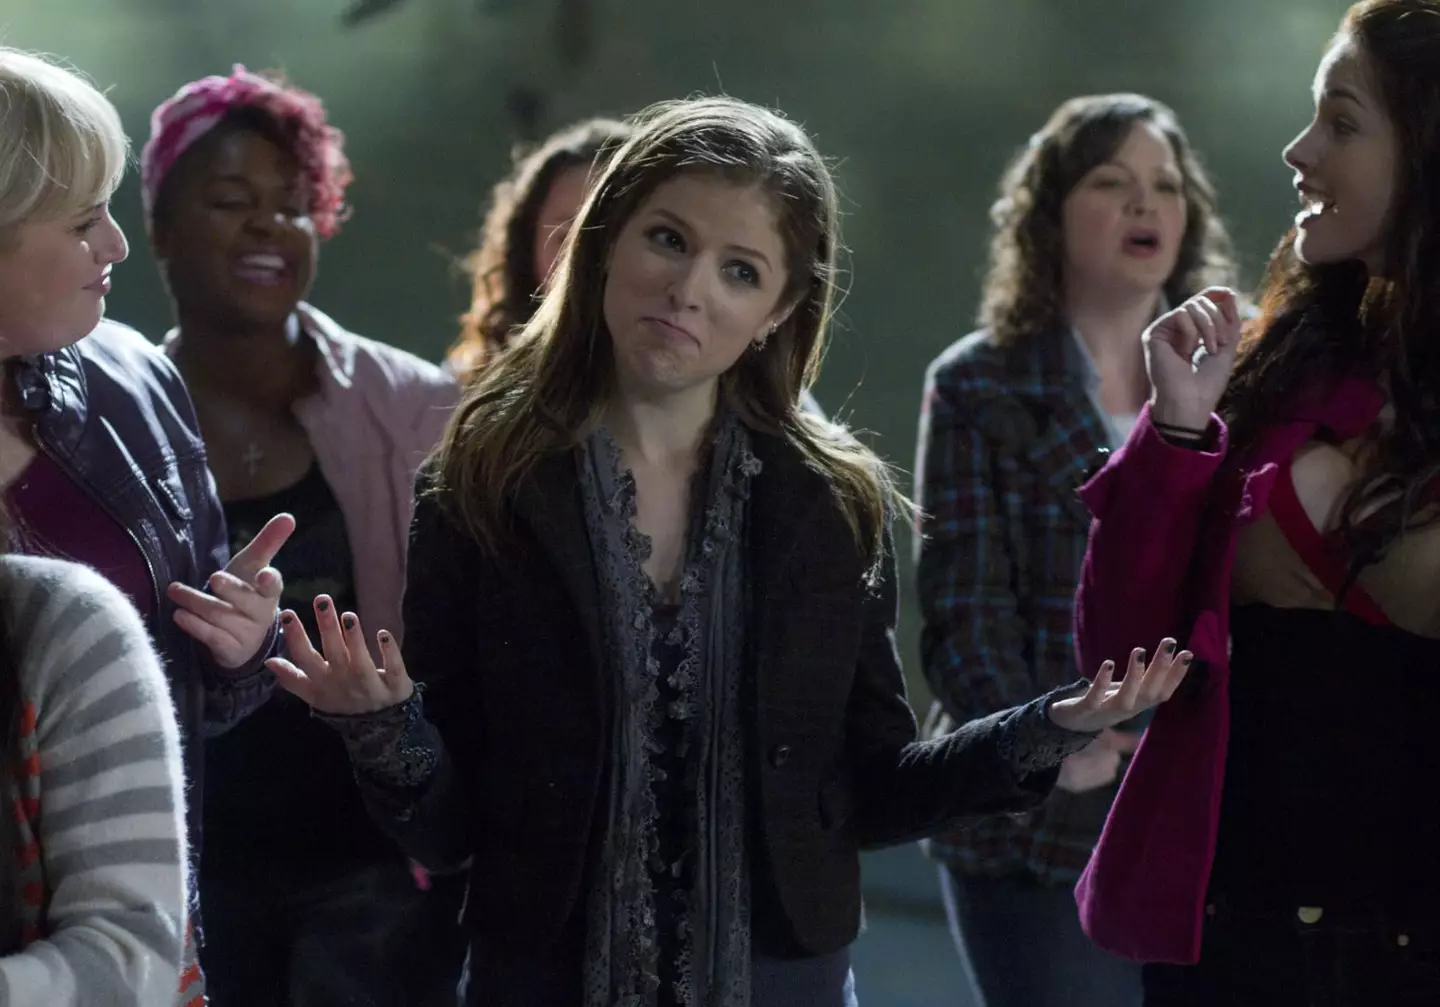 Anna Kendrick leads the acapella singing group, the Barden Bellas.